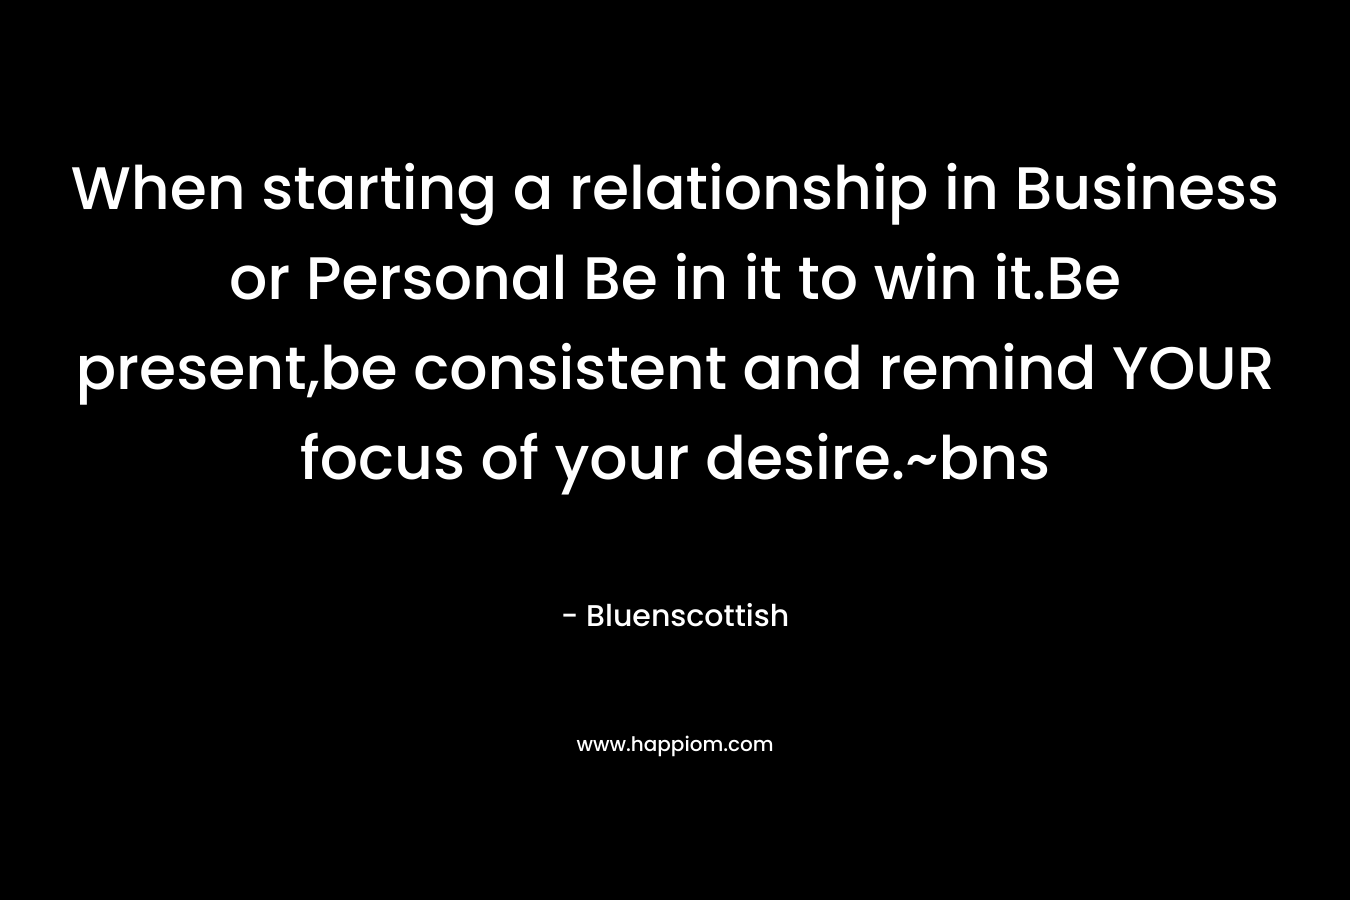 When starting a relationship in Business or Personal Be in it to win it.Be present,be consistent and remind YOUR focus of your desire.~bns